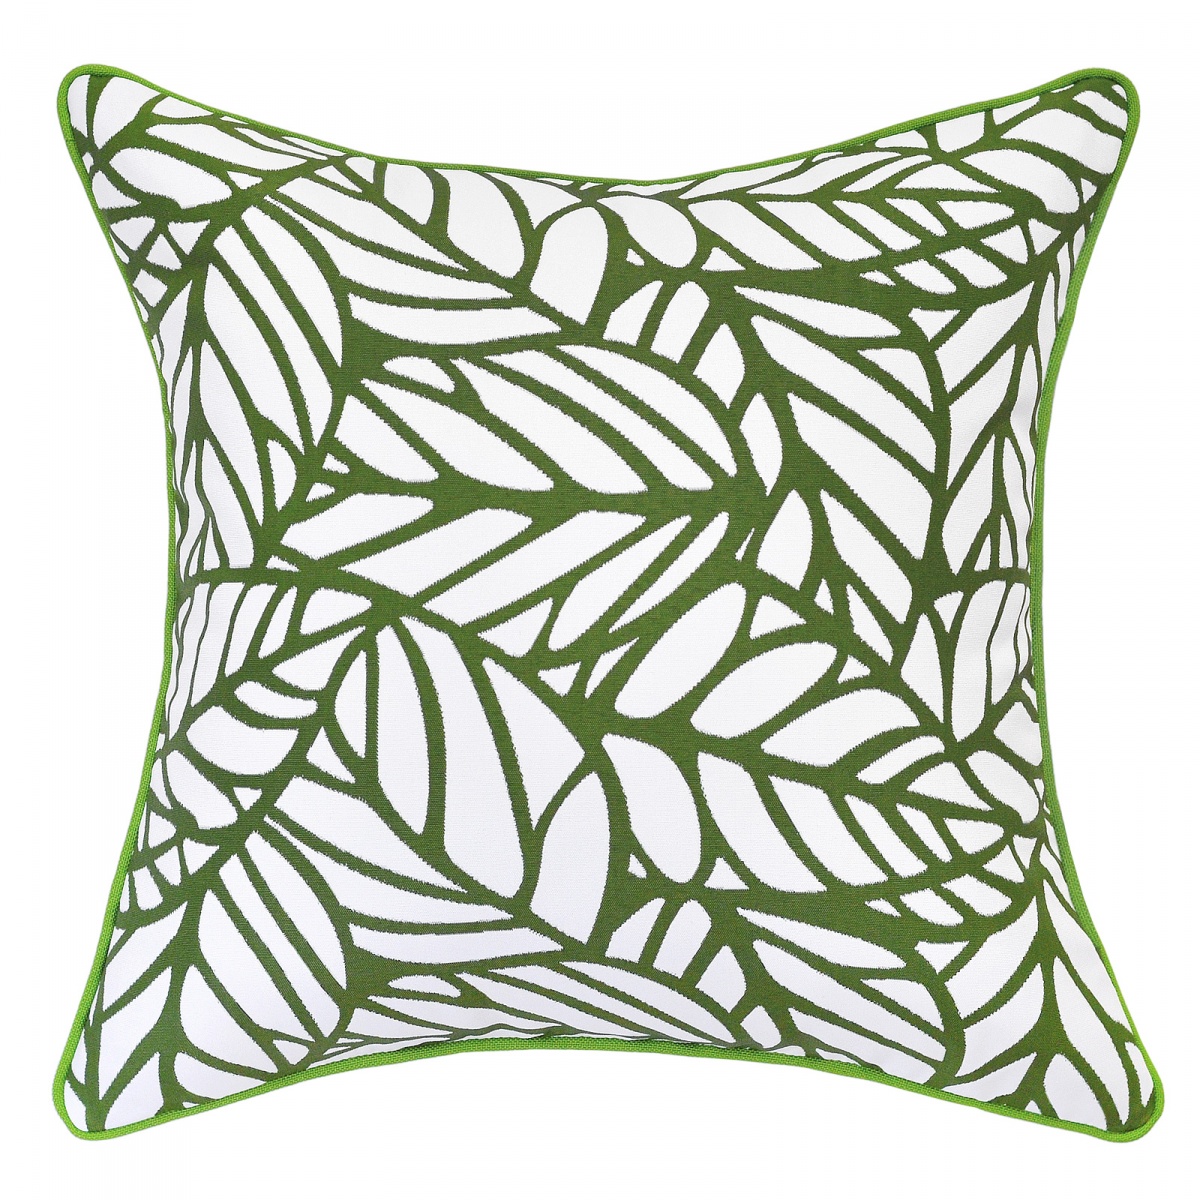 Tulum Palm Reverse Outdoor Cushion with Piping - 45x45cm